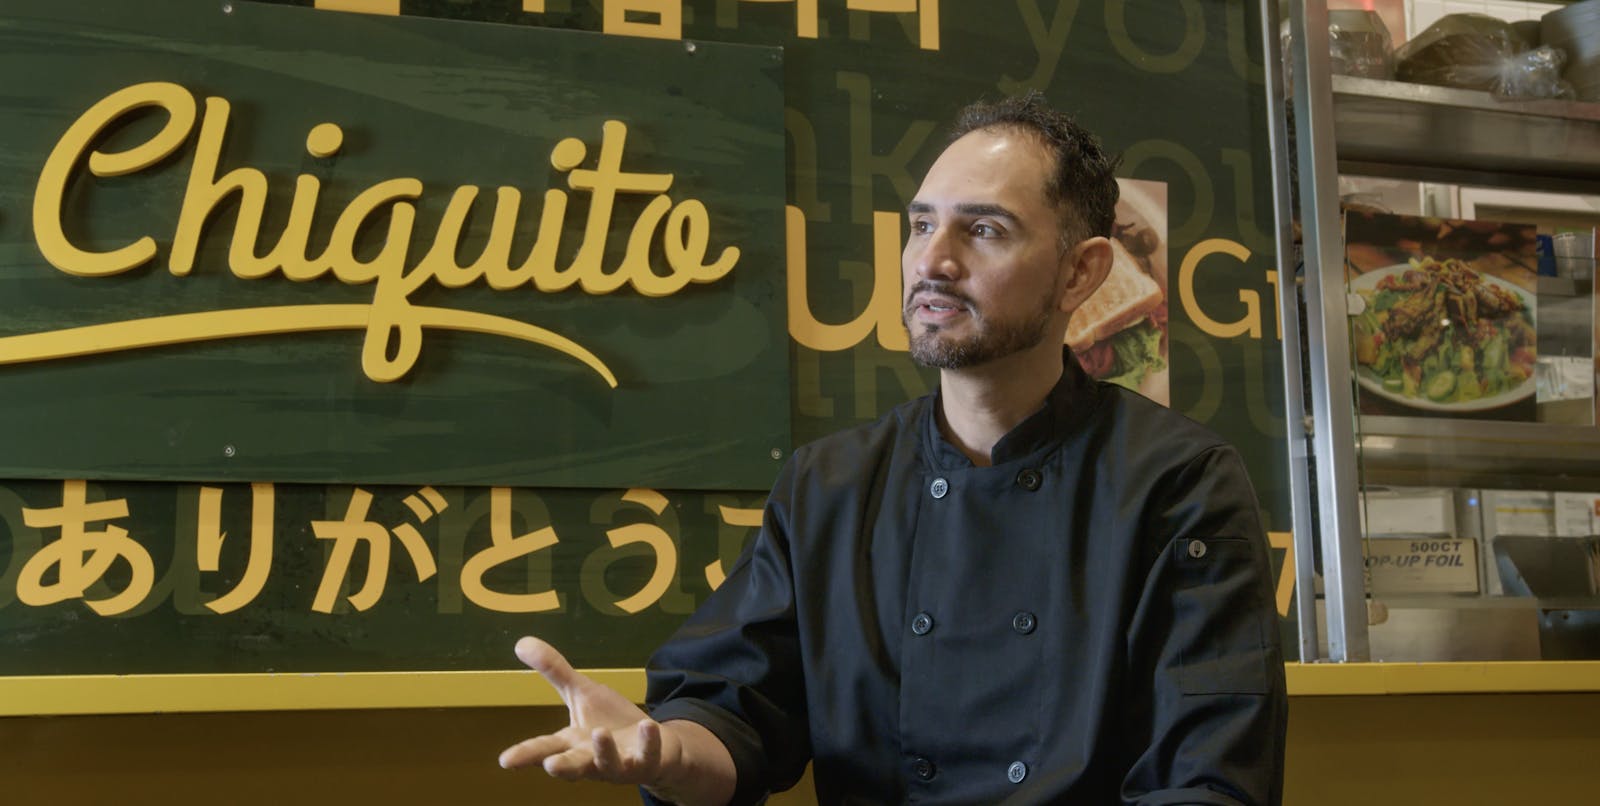 The owner of the Jose Chiquito restaurant in Broadway, California. 